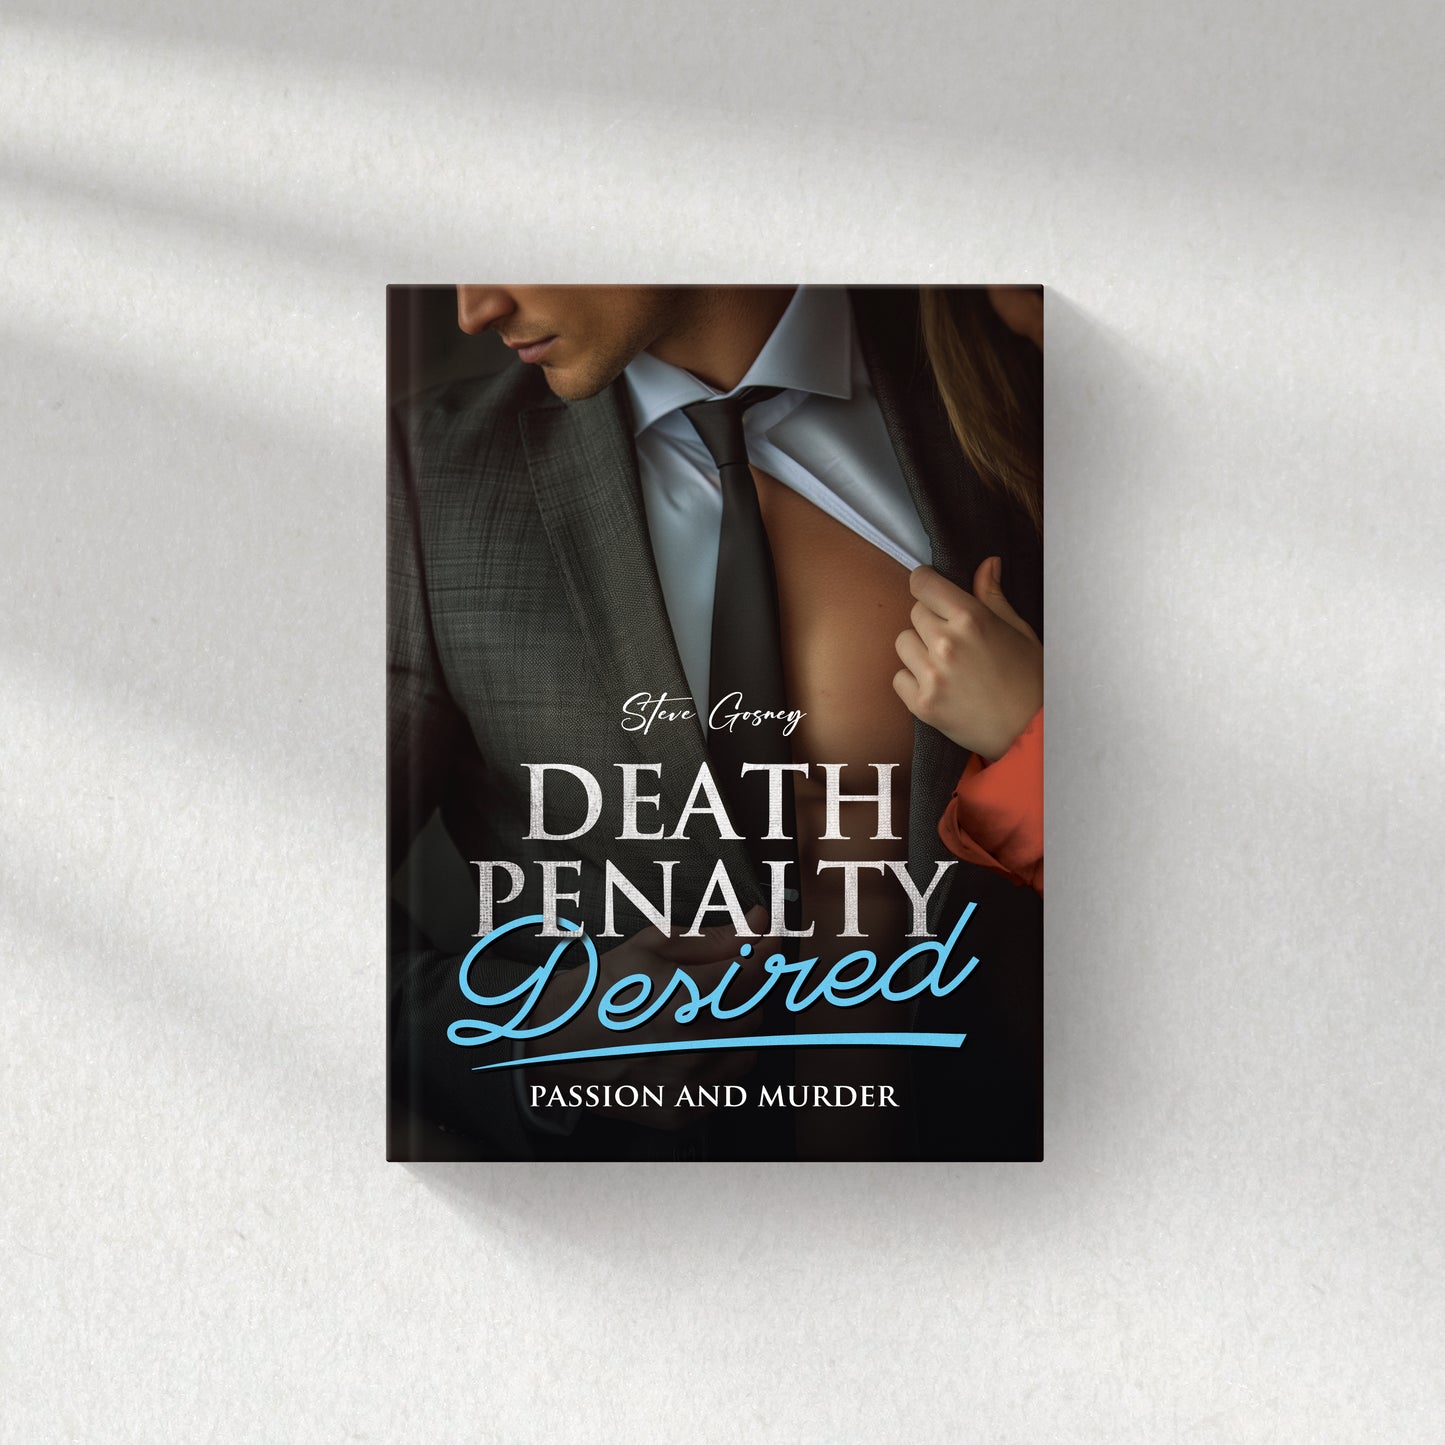 Softcover PG rated novel Death Penalty Desired: Passion and Murder (autographed)